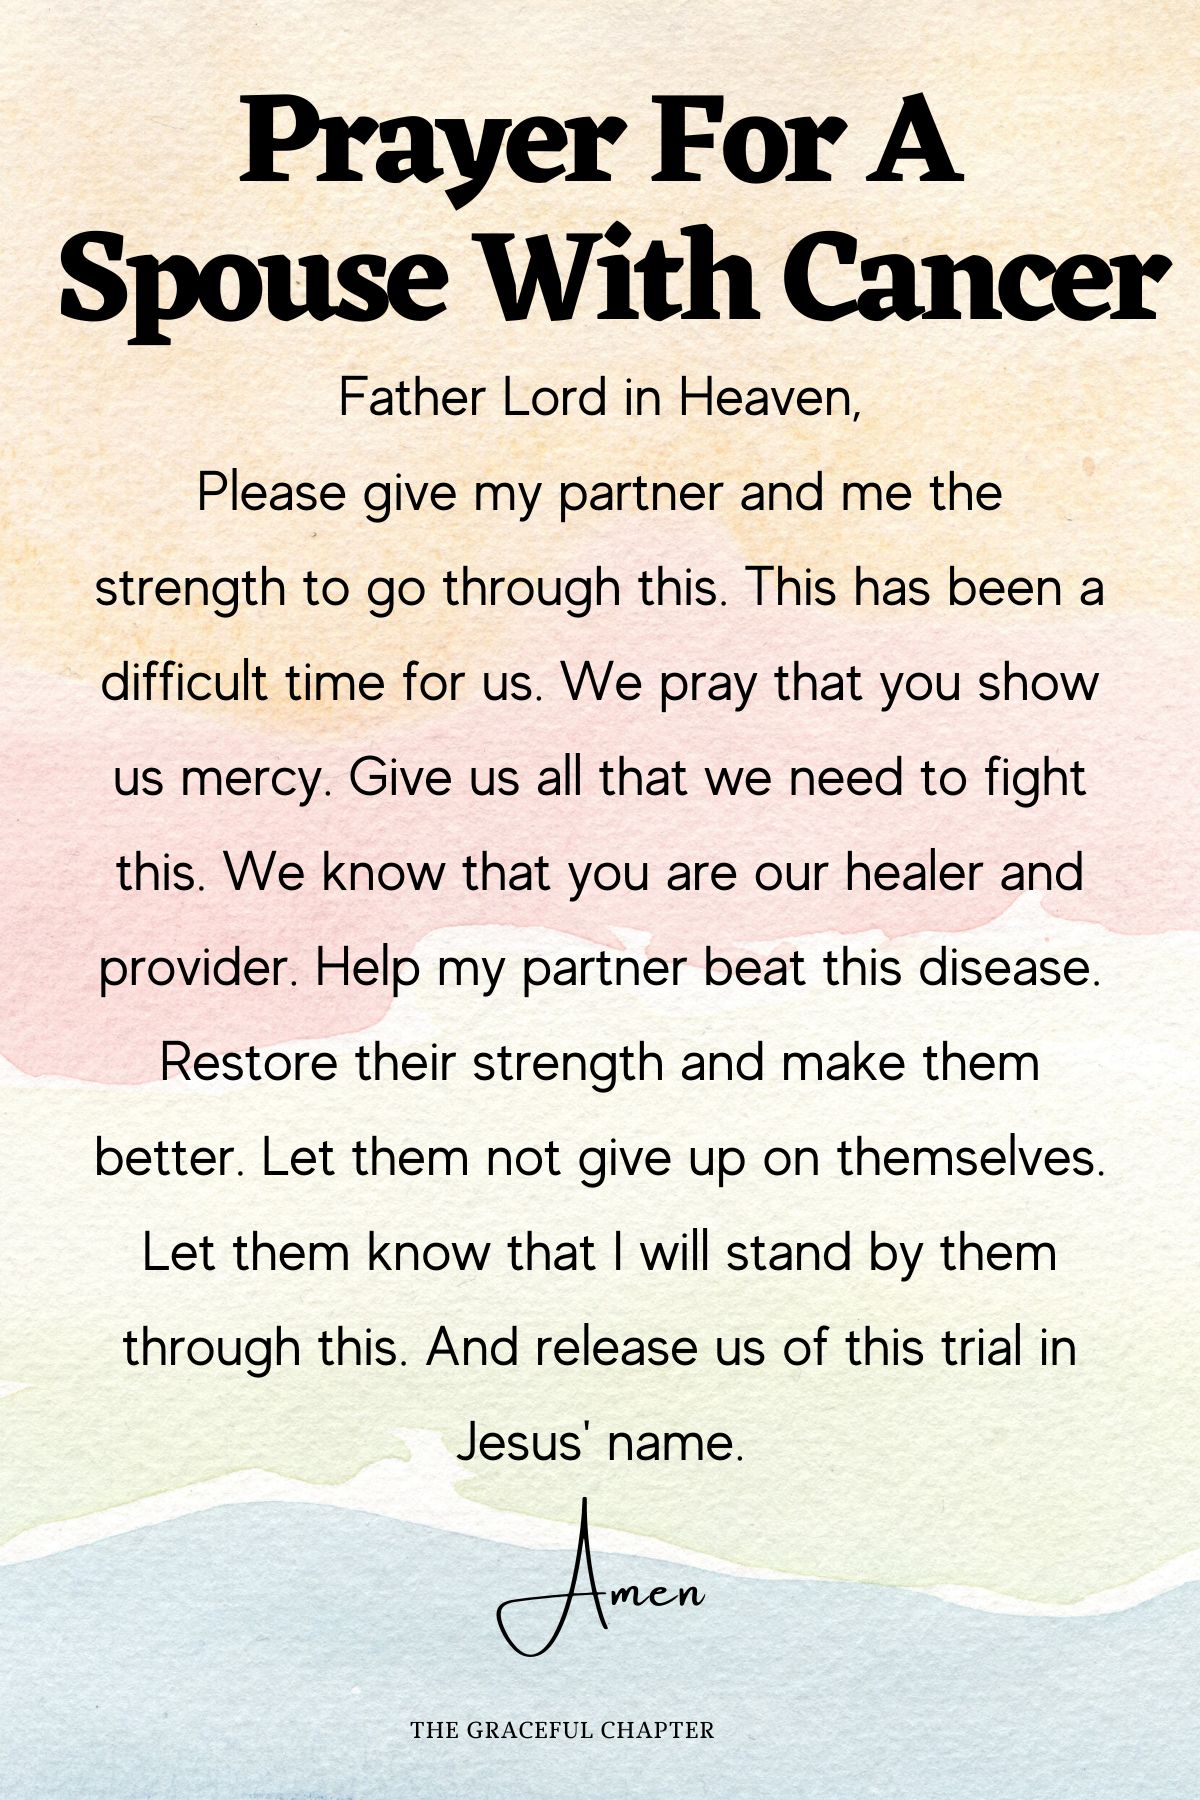 Prayer For A Spouse With Cancer